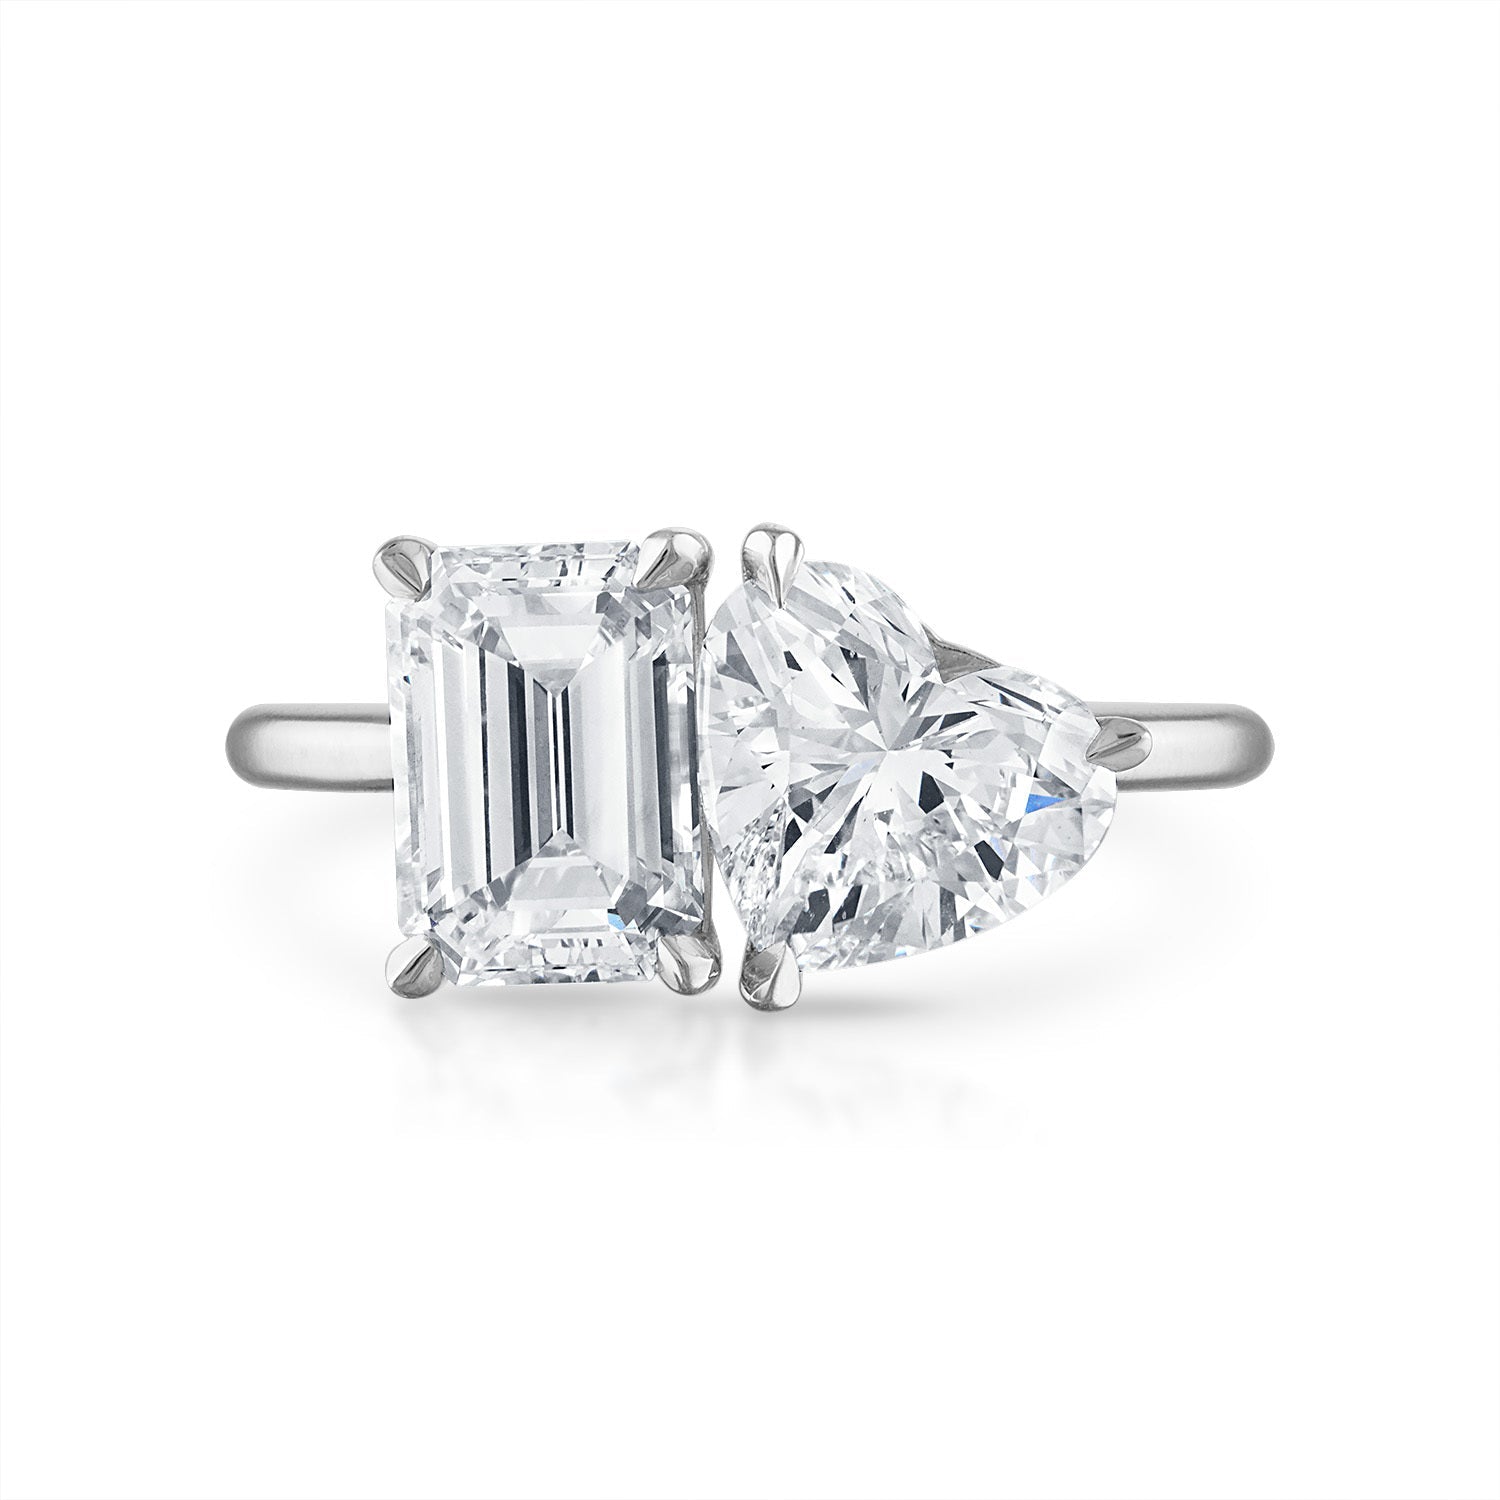 3.06cttw Emerald Cut and Heart Shaped Two-Stone Engagement Ring